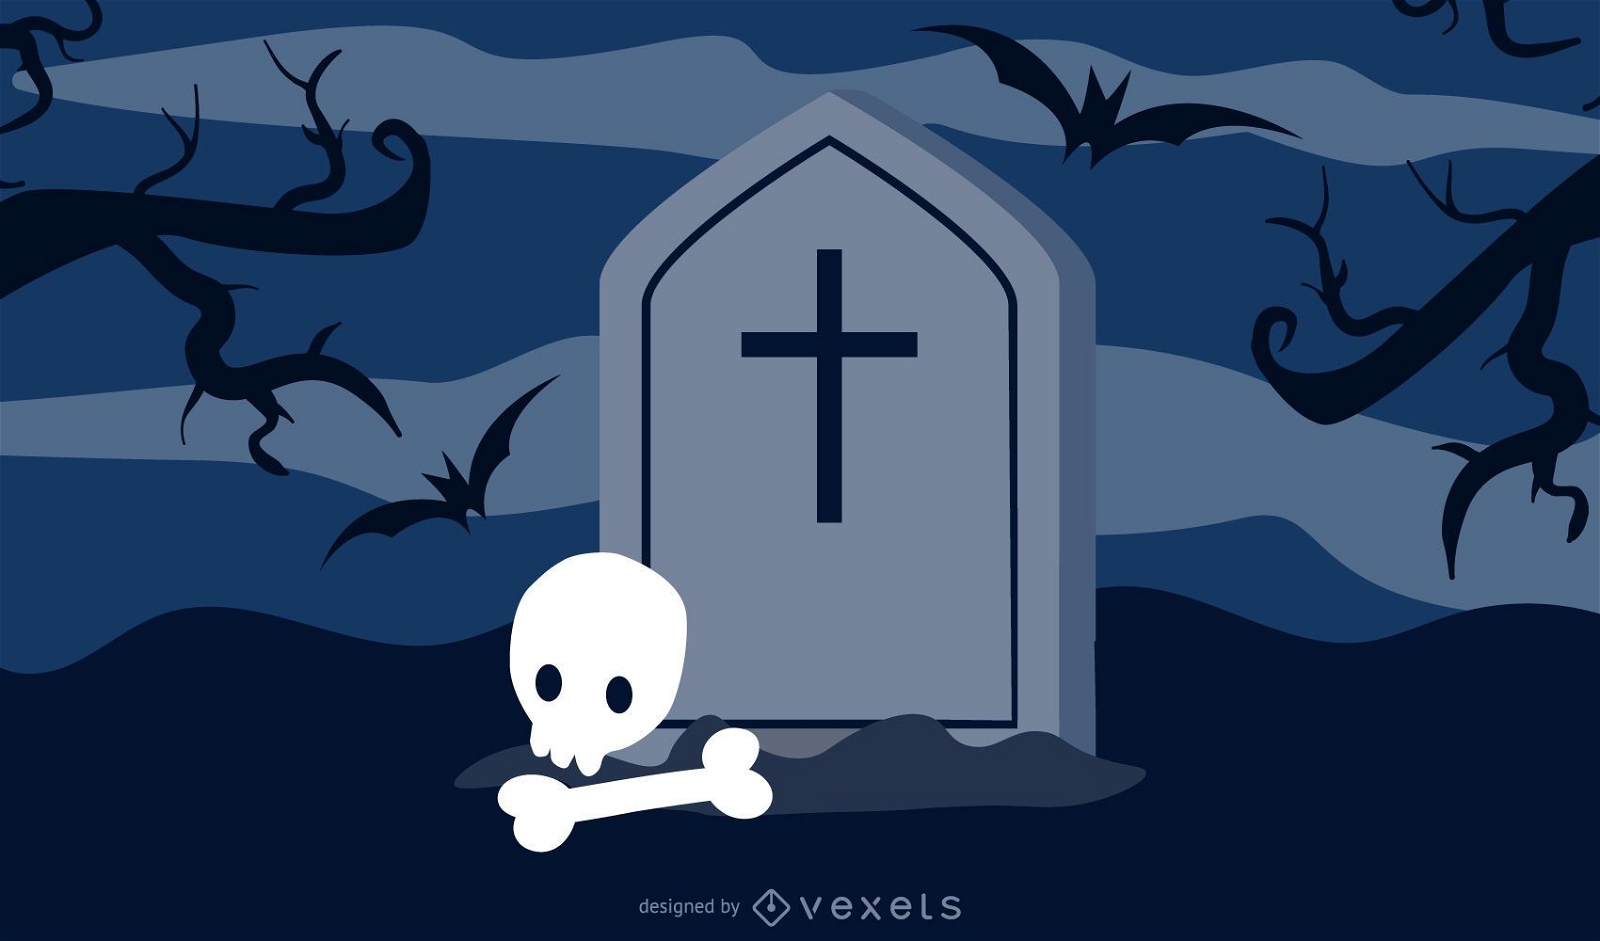 Grave on Halloween Theme with Skull